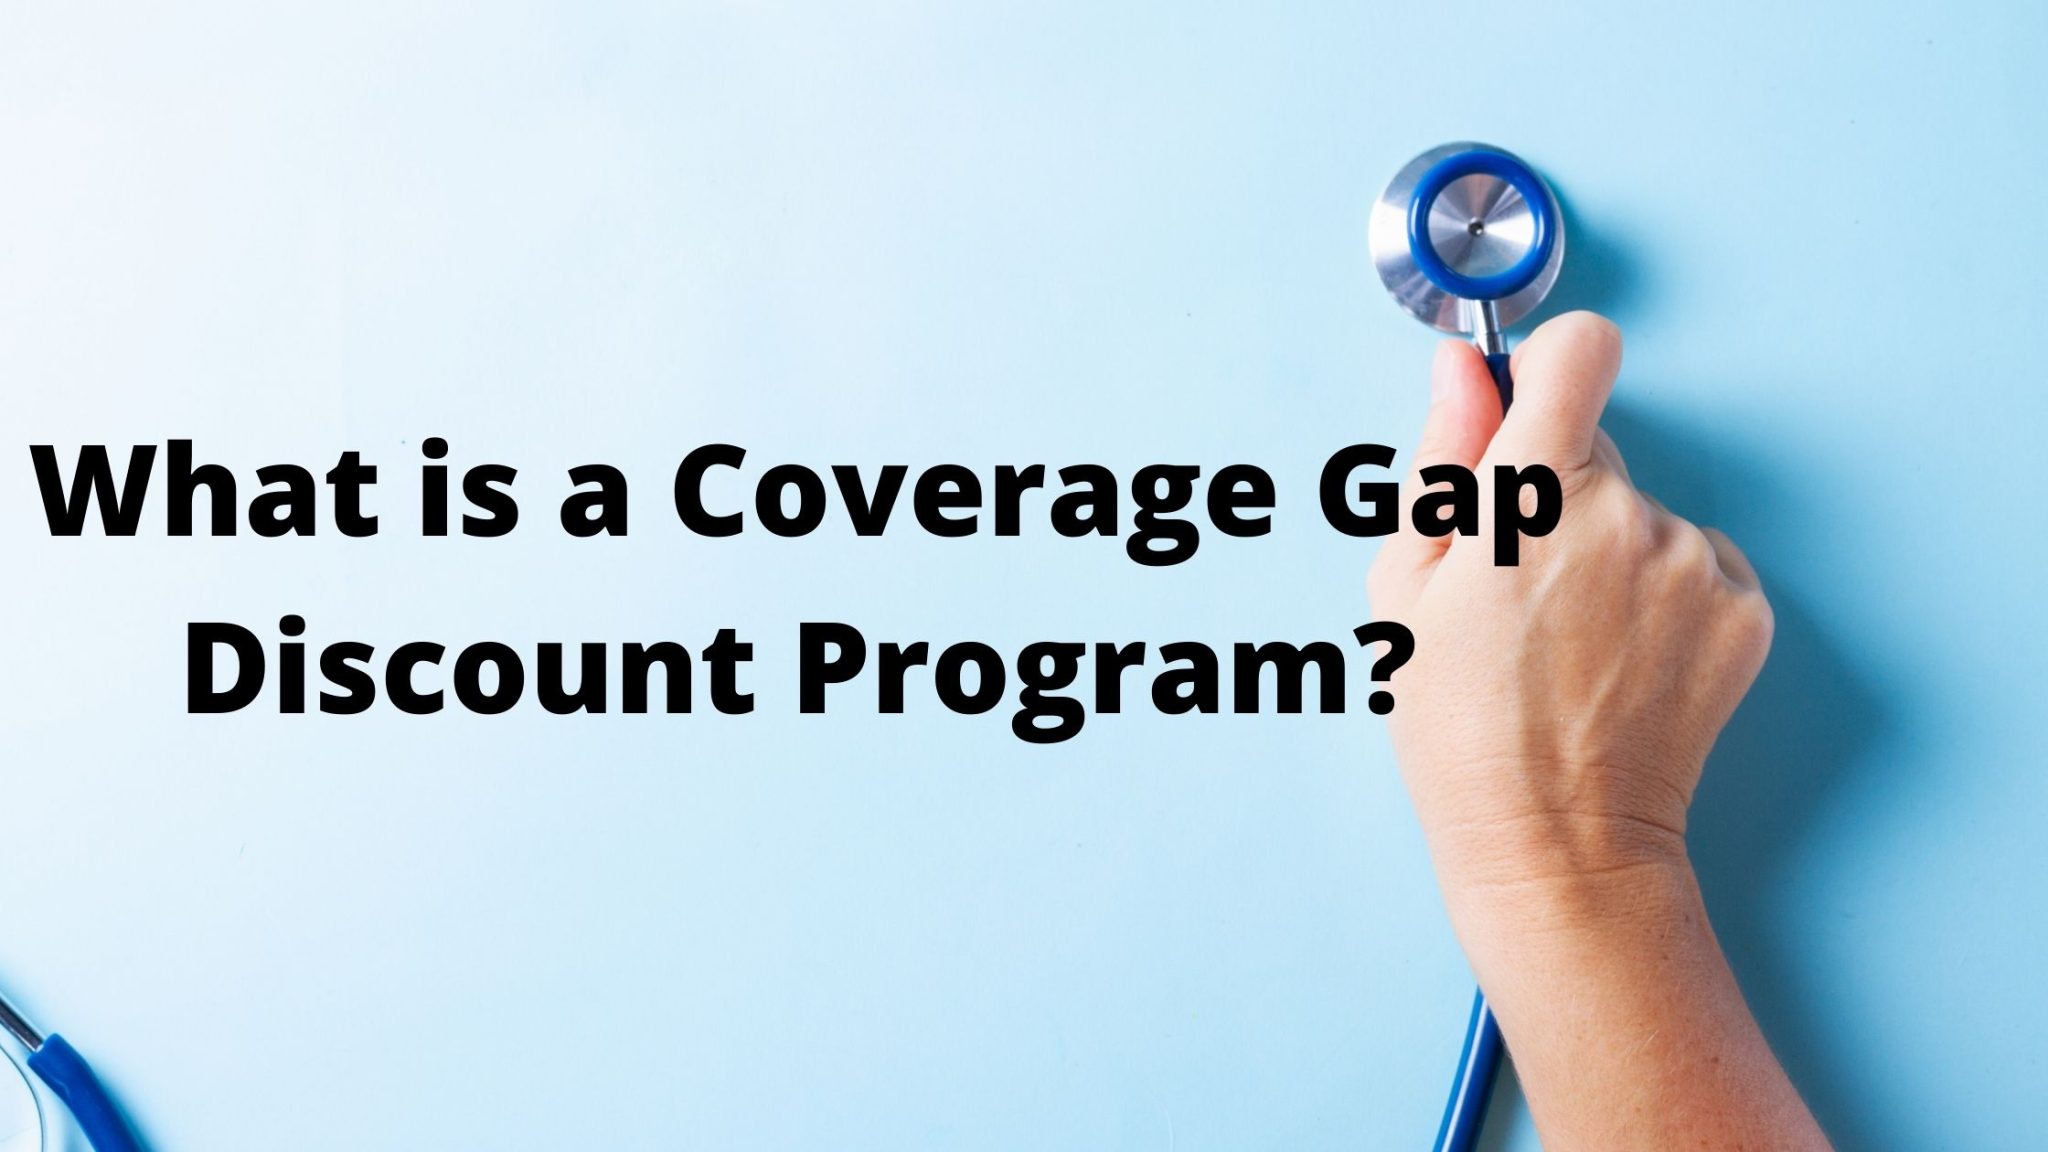 The Complete Guide to Coverage Gap Discount Programs